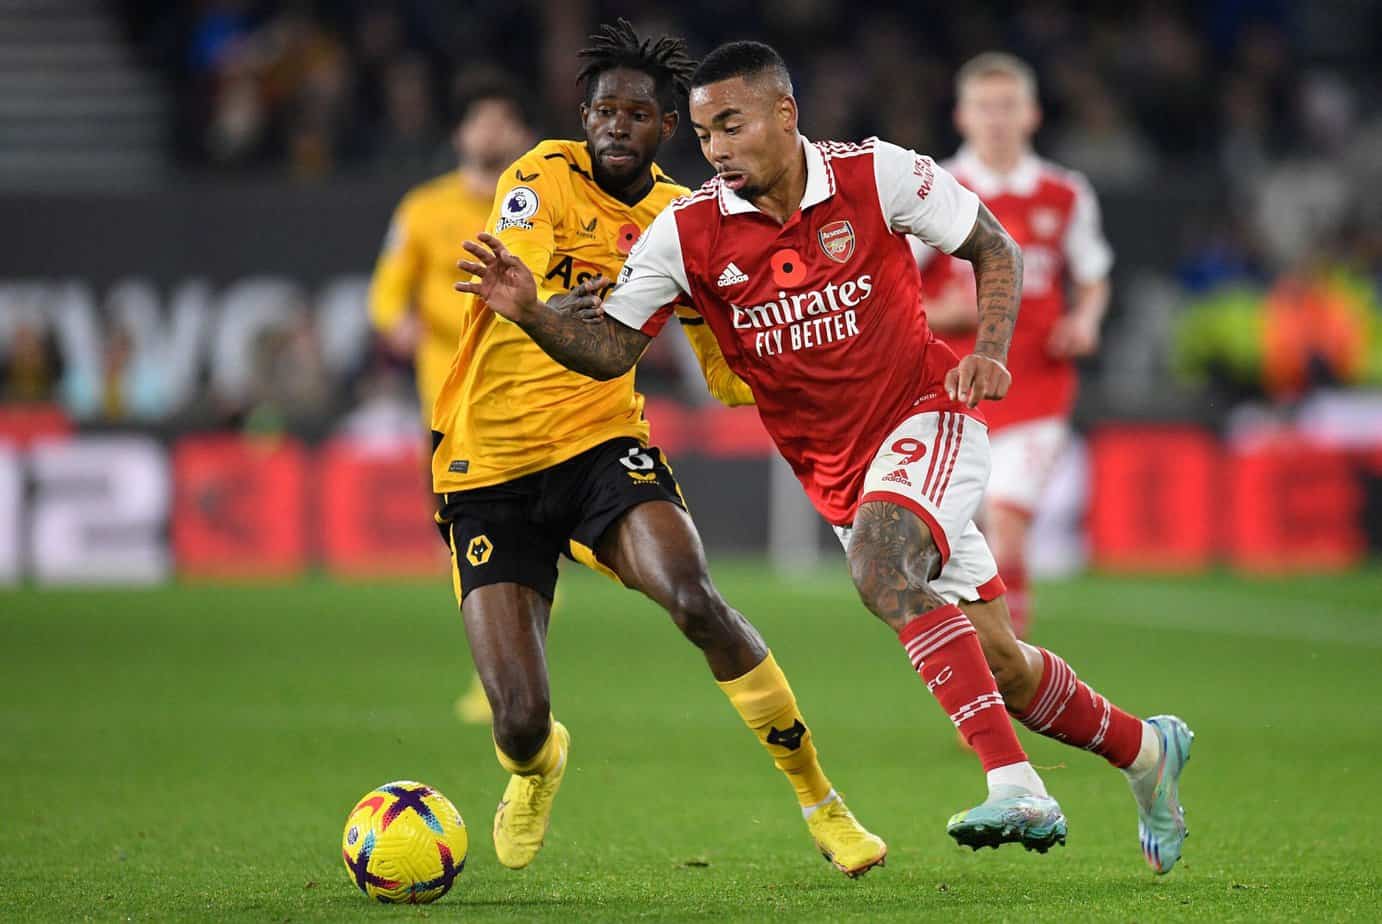 Arsenal vs. Wolves Preview and Betting Odds